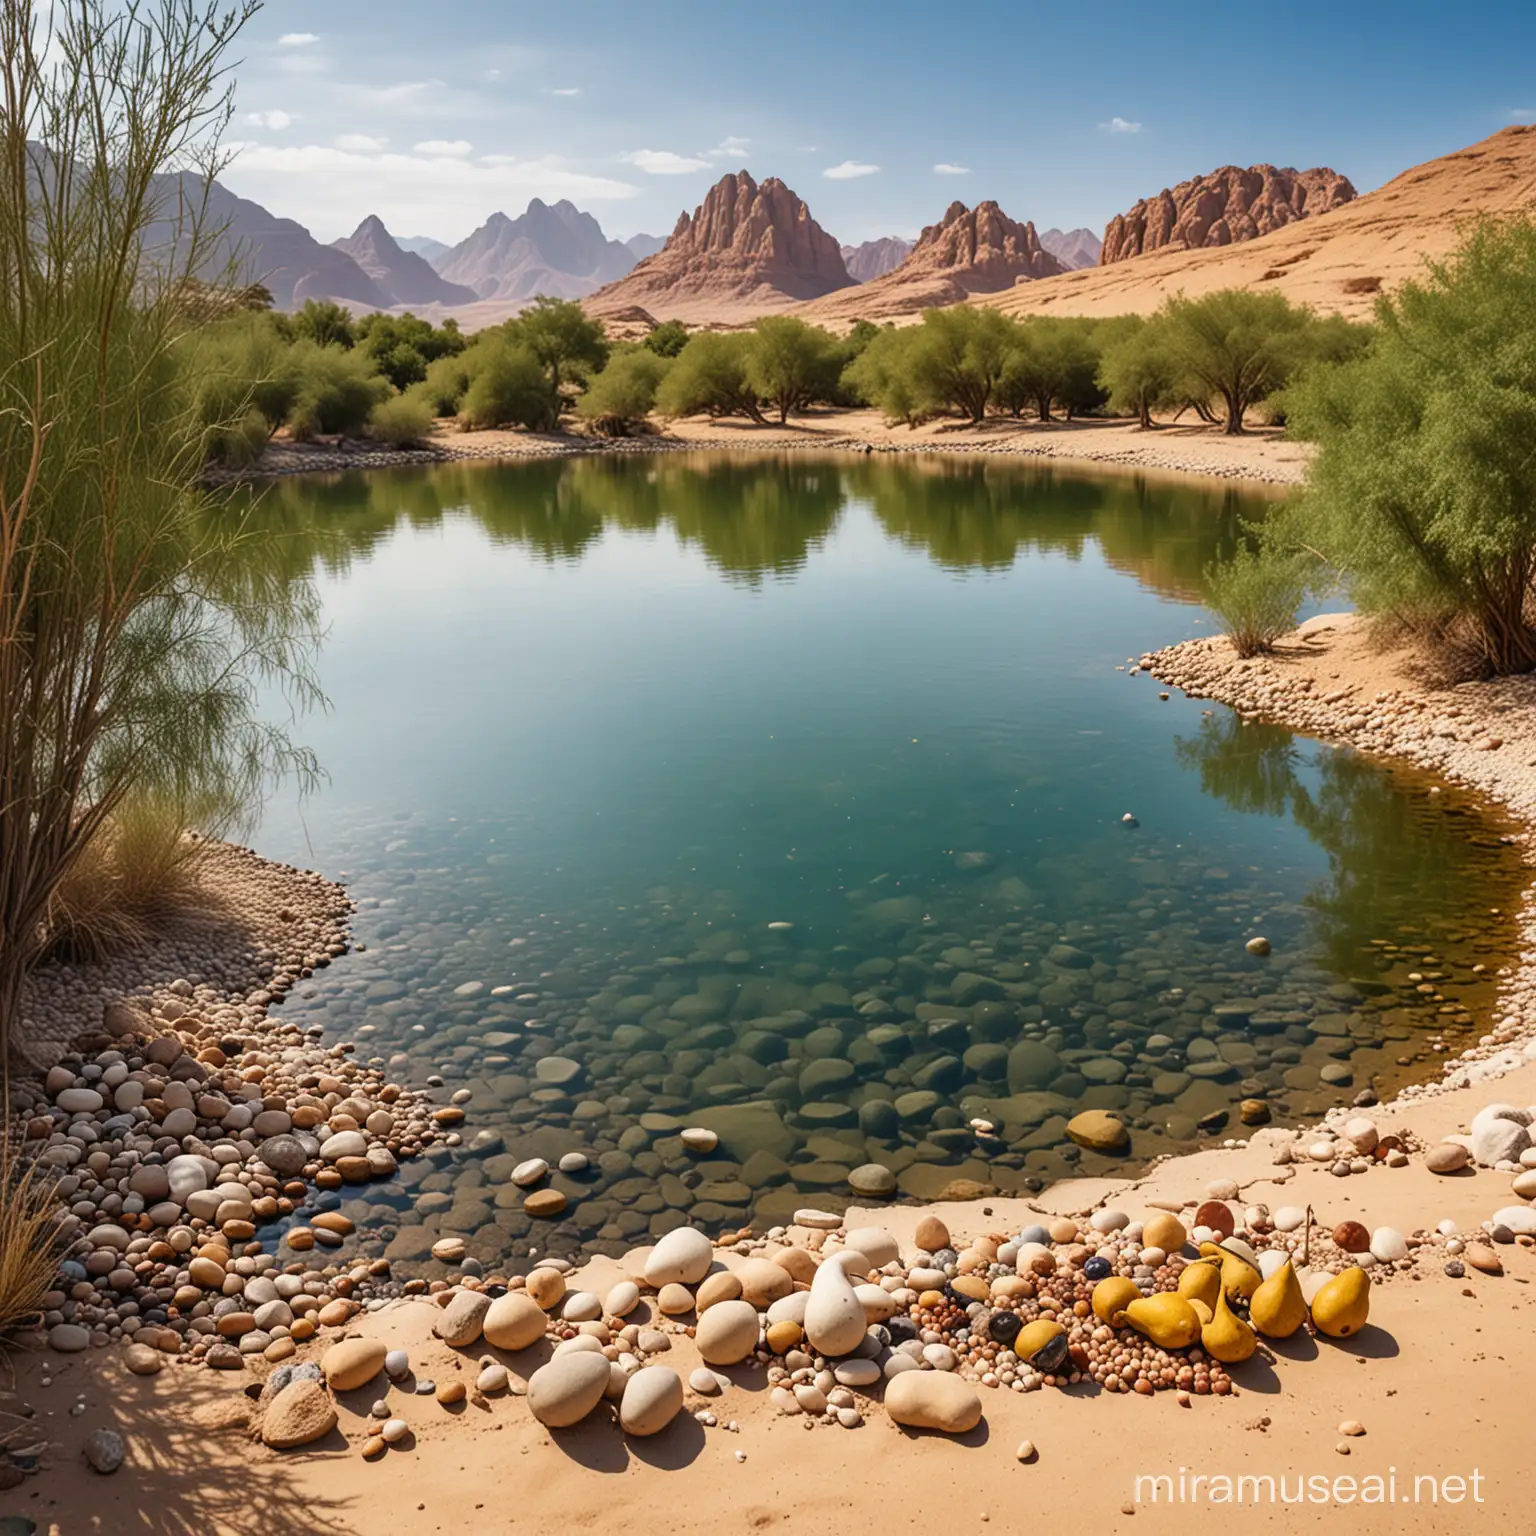 Tranquil Desert Oasis Monks Gathering Pearls by the Lake